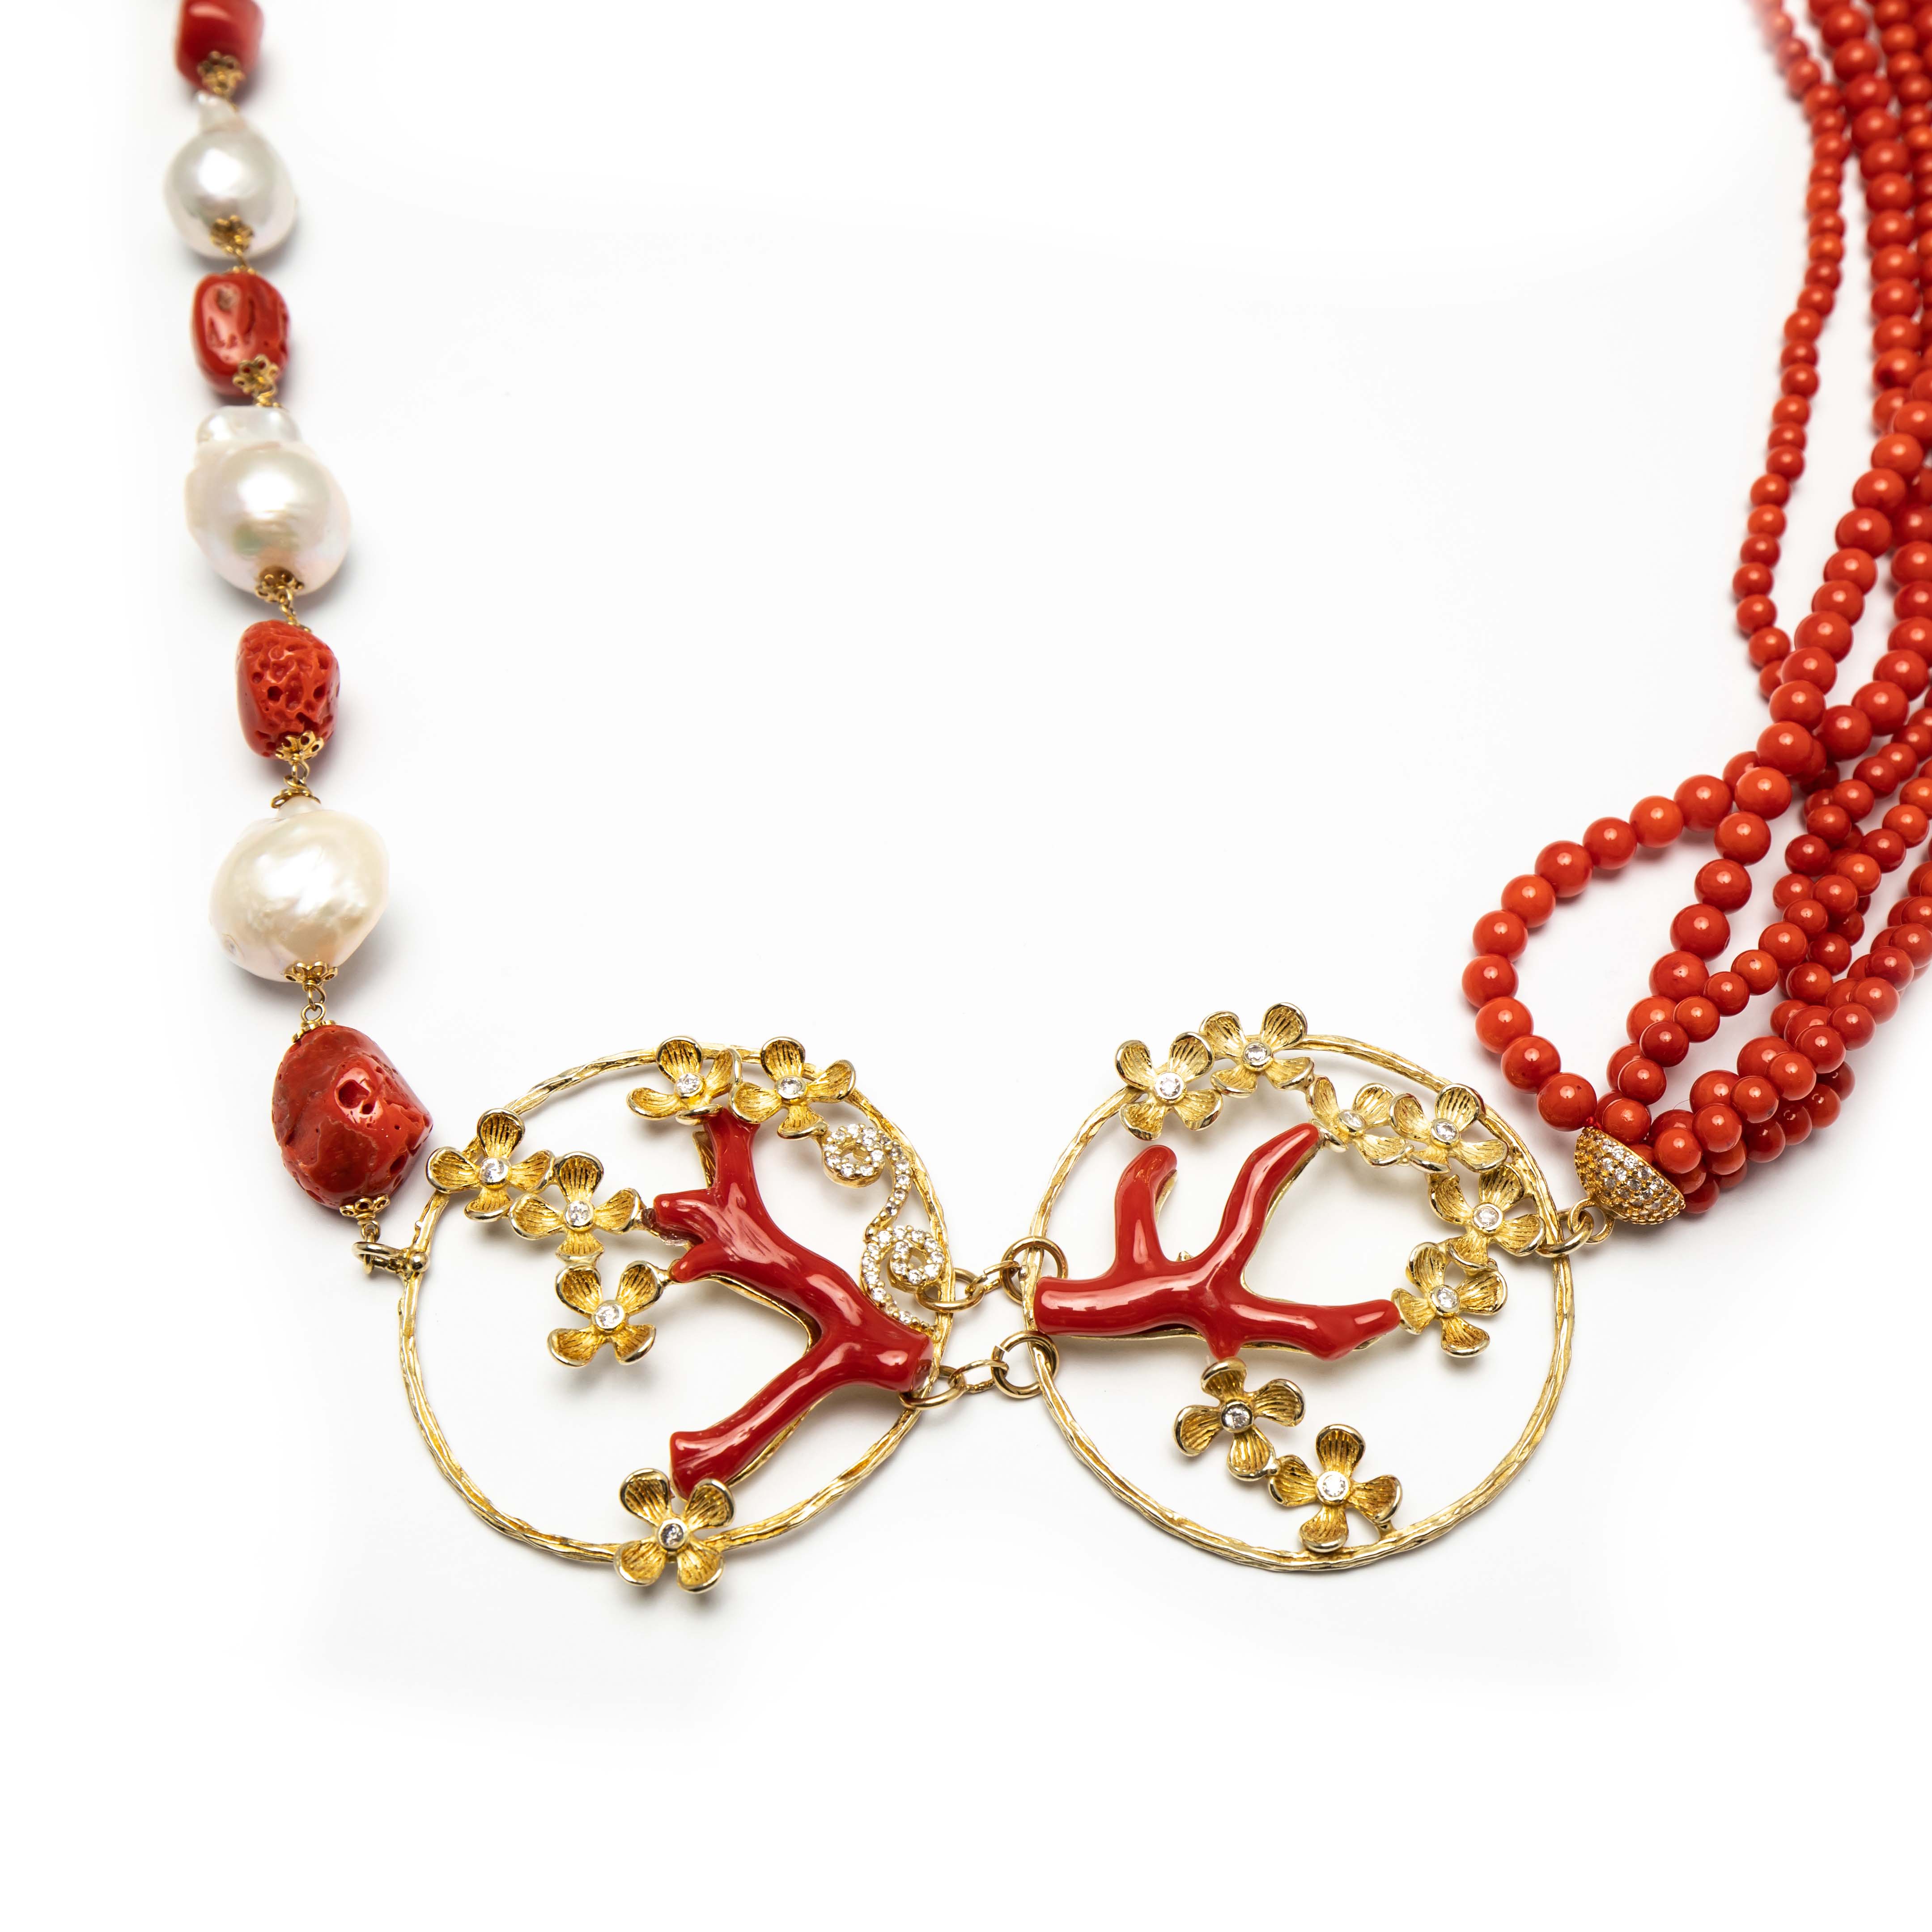 Natural Stone Necklace With Coral And Pearls